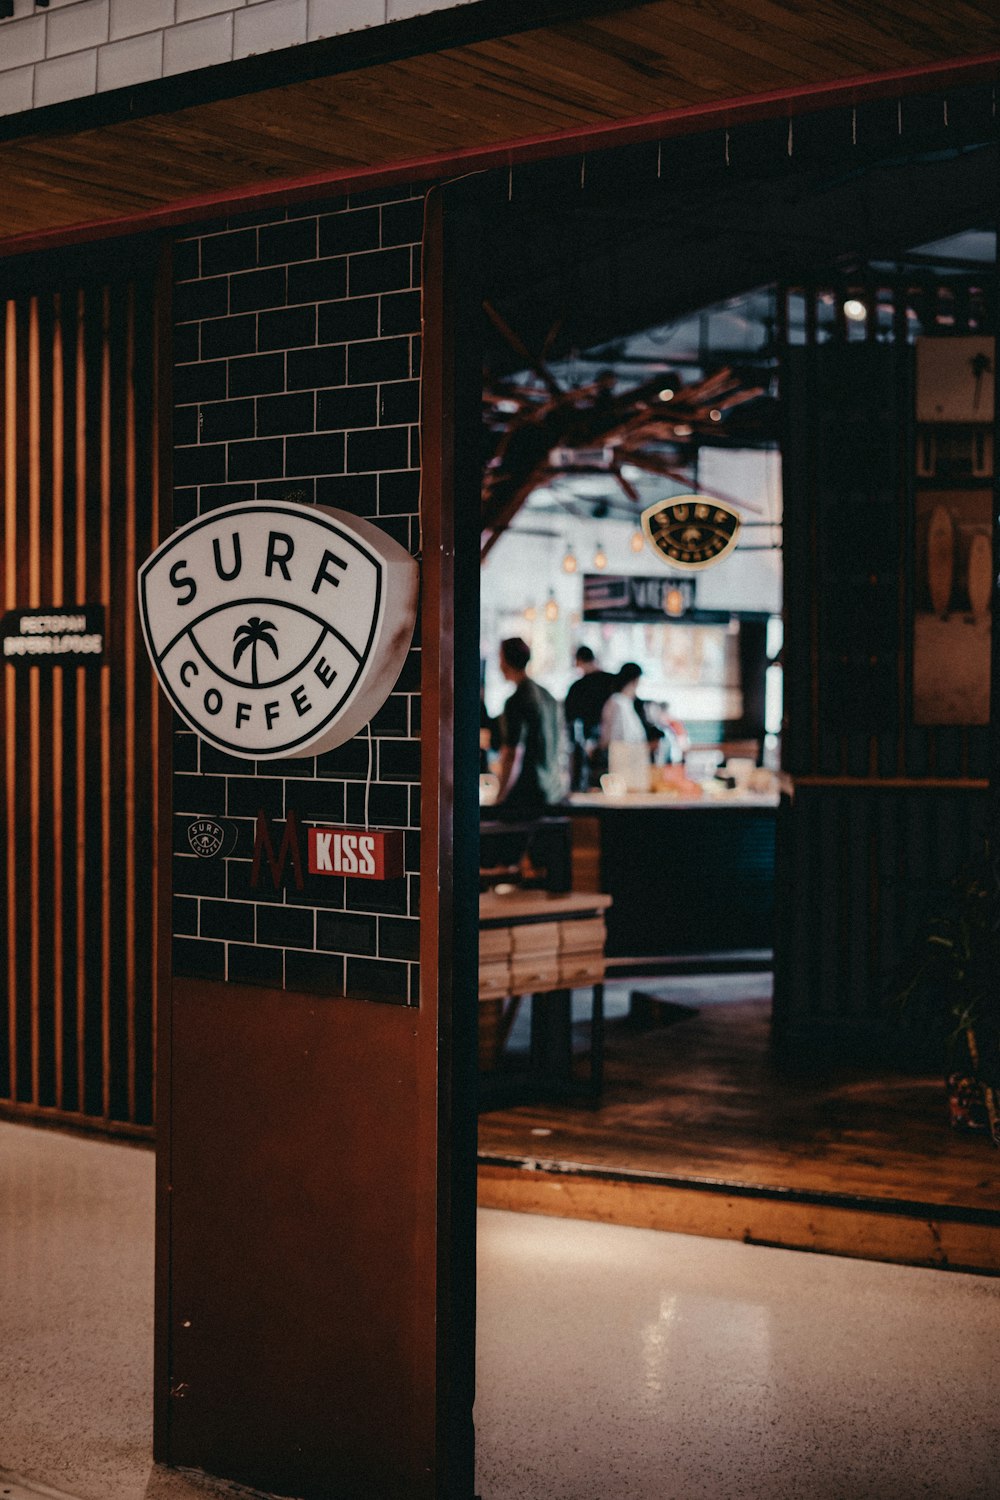 a surf coffee sign on the side of a building